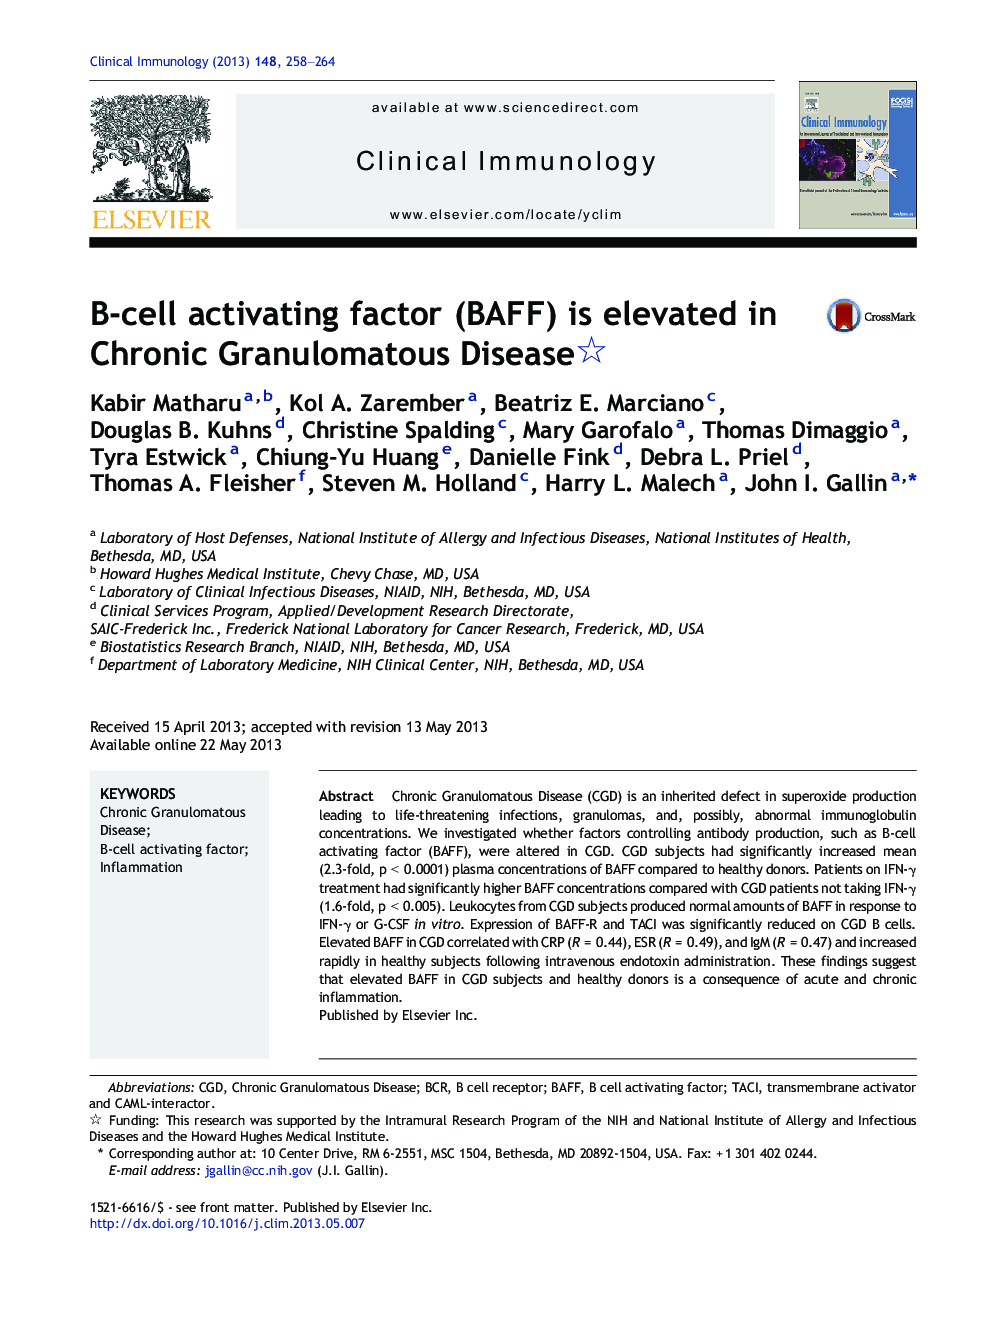 B-cell activating factor (BAFF) is elevated in Chronic Granulomatous Disease